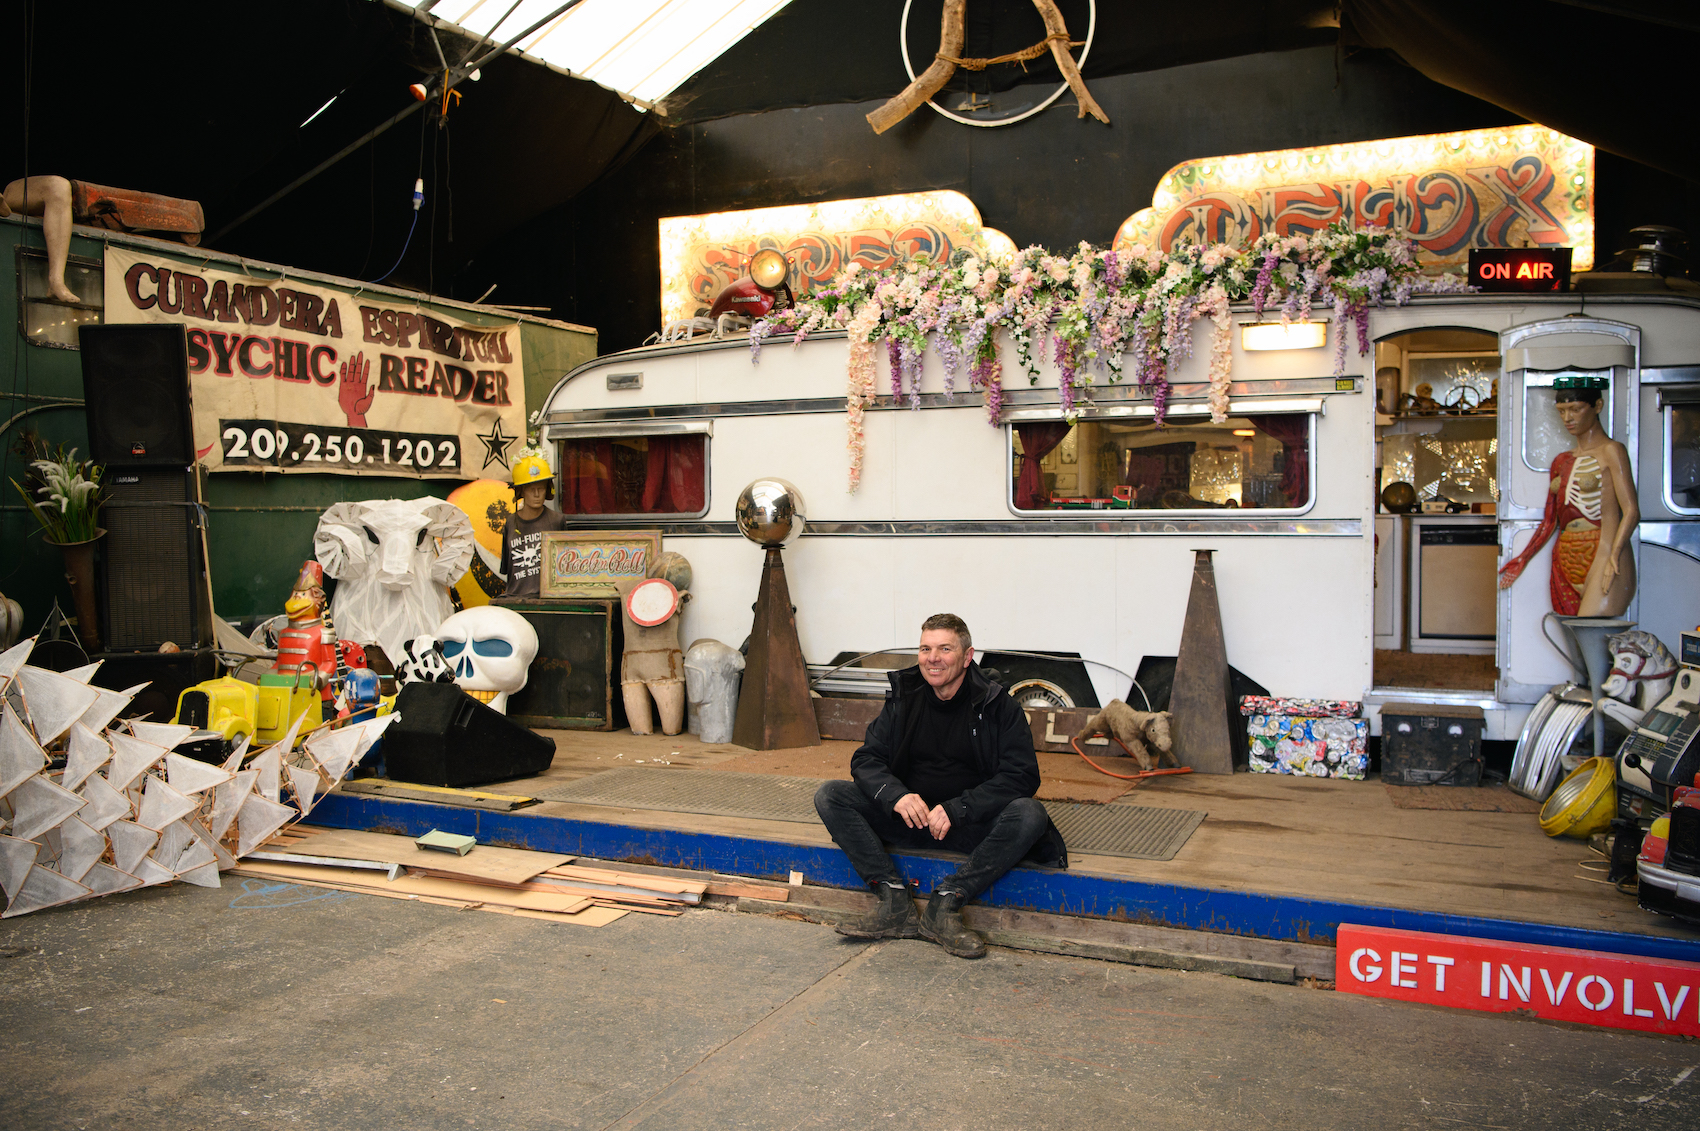 A man sits in infront of a range of eccentric objects and a caravan.